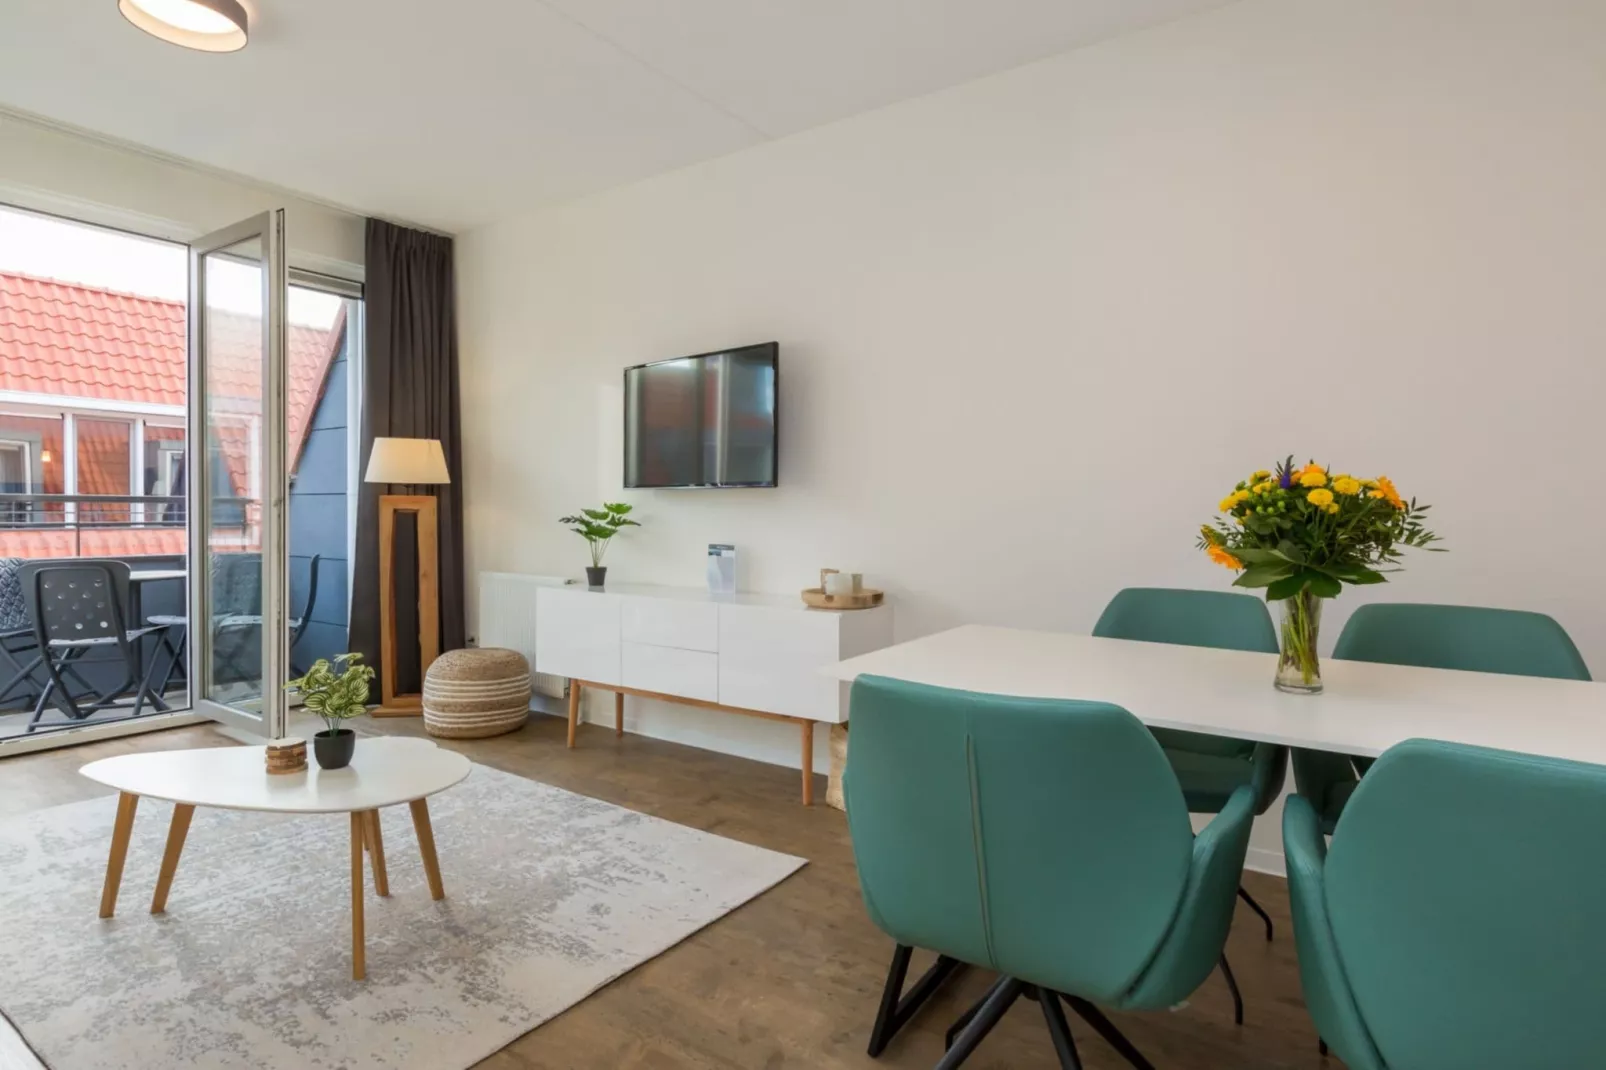 Aparthotel Zoutelande - 4 pers luxe appartement-Woonkamer